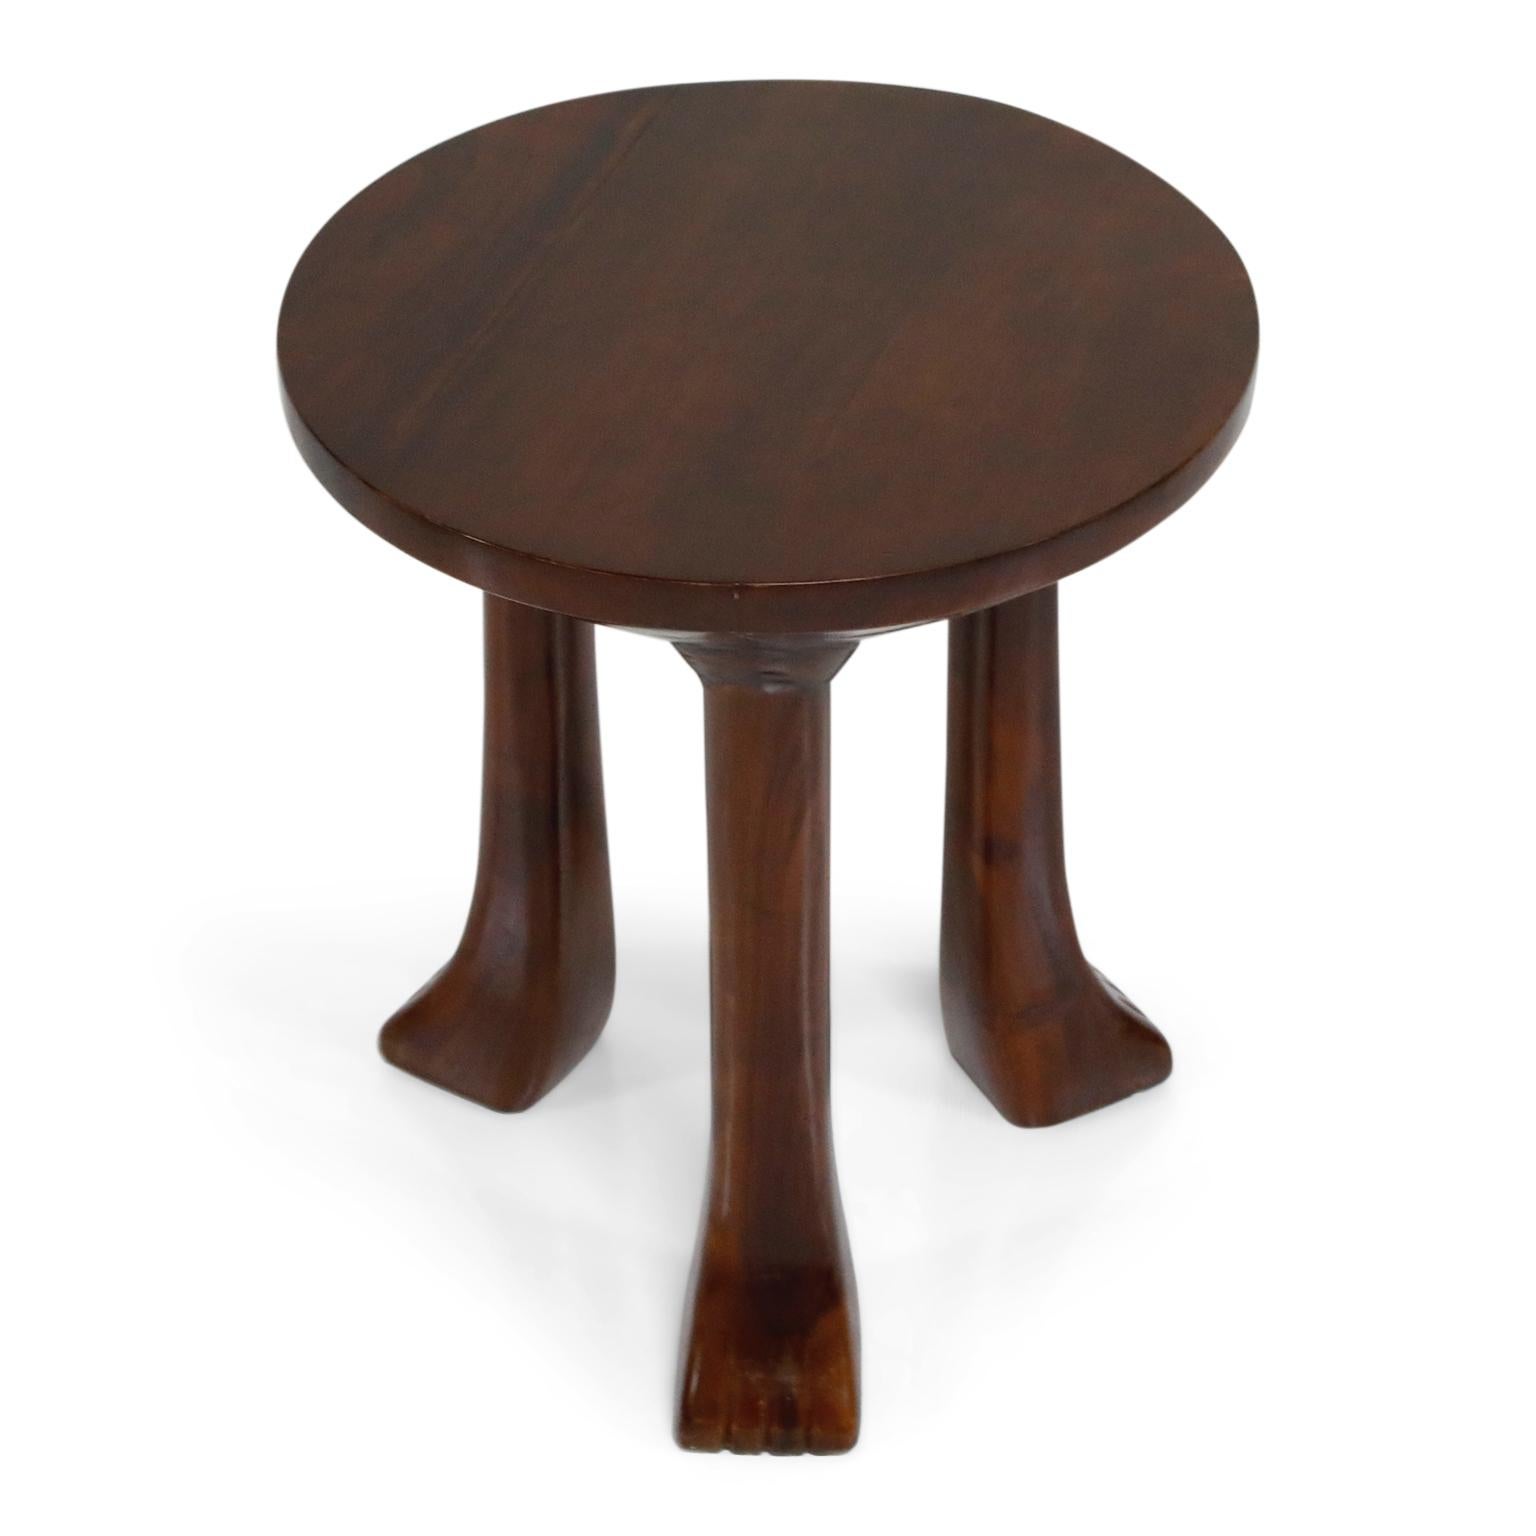 Carved Teak Three-Legged Lionfoot Side Tables in the Style of John Dickinson 1